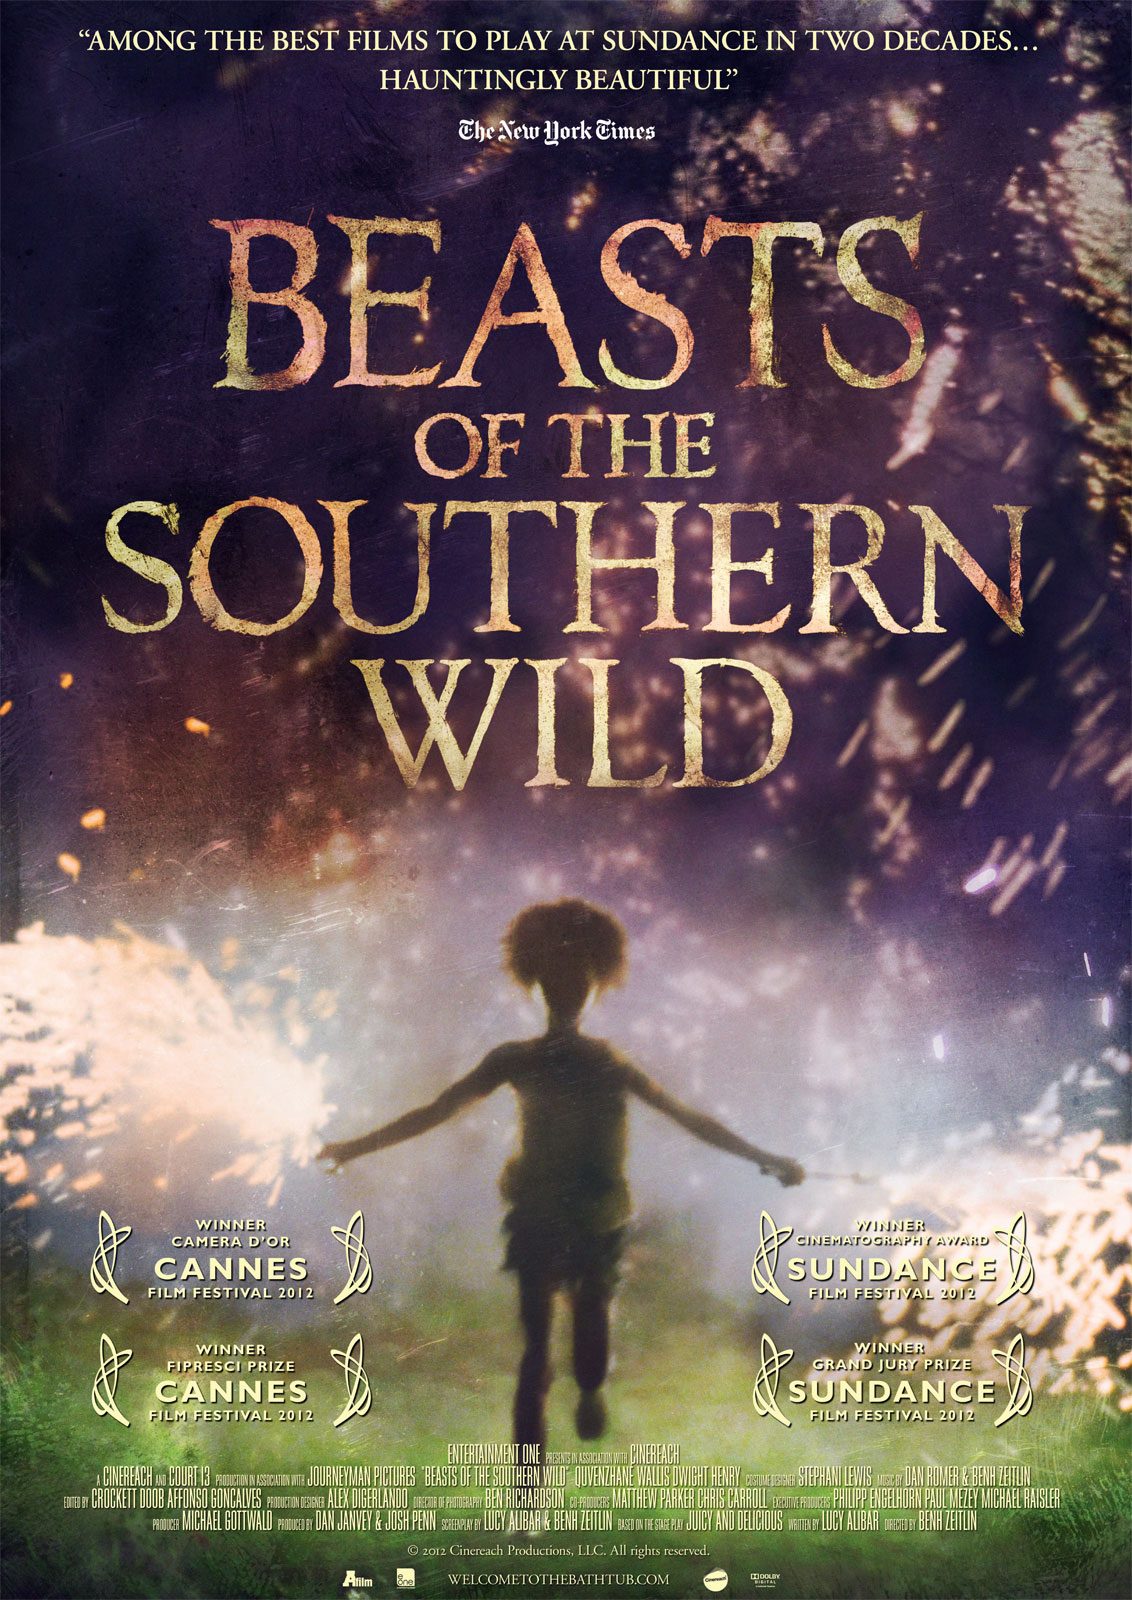 Beasts-of-the-Southern-Wild-Poster-web - Pulitzer Arts Foundation